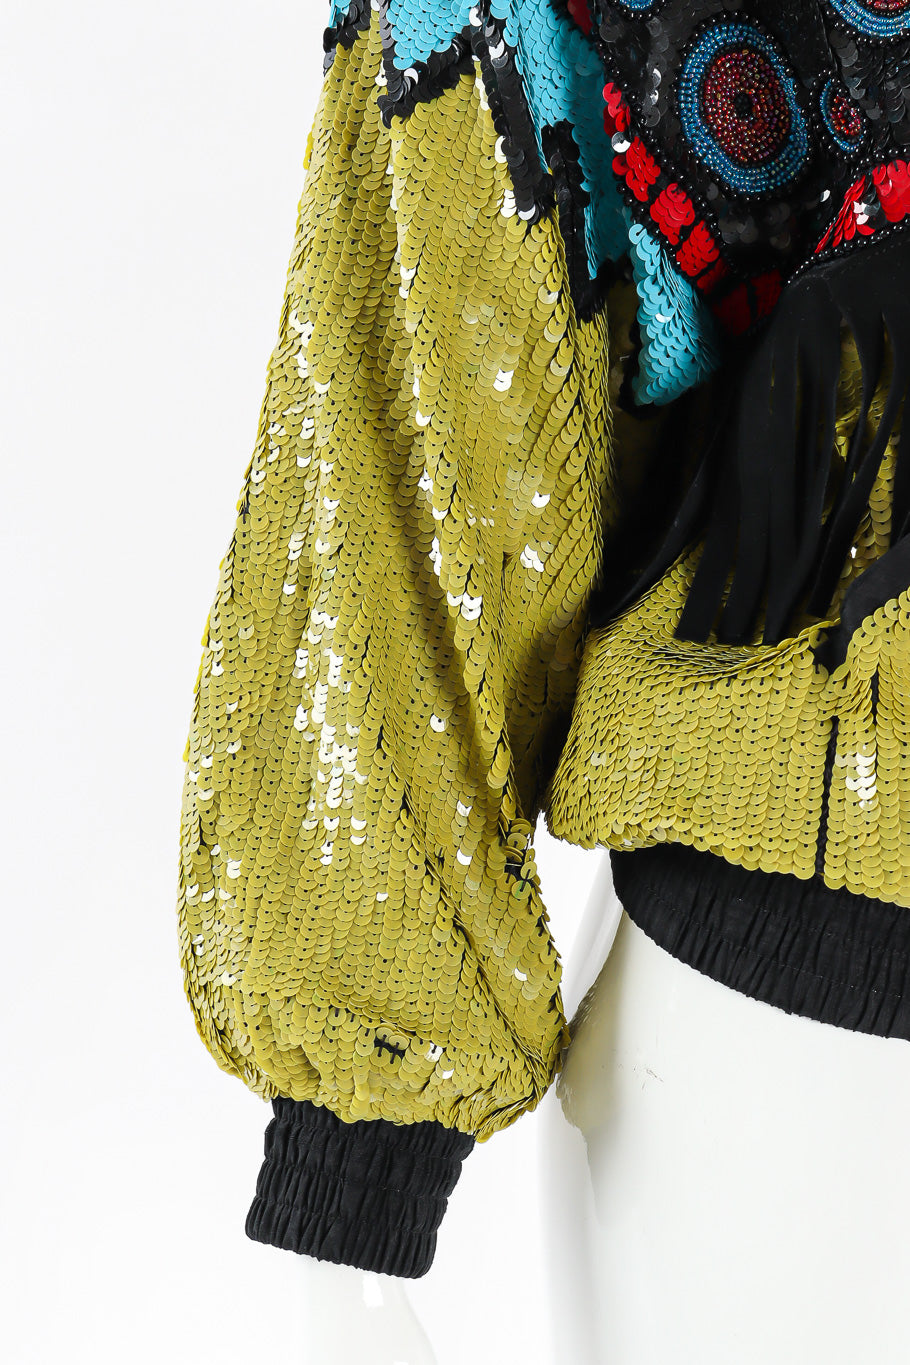 Fringe and sequin jacket by Modi Sequin and Glass Beads Close-up @recessla